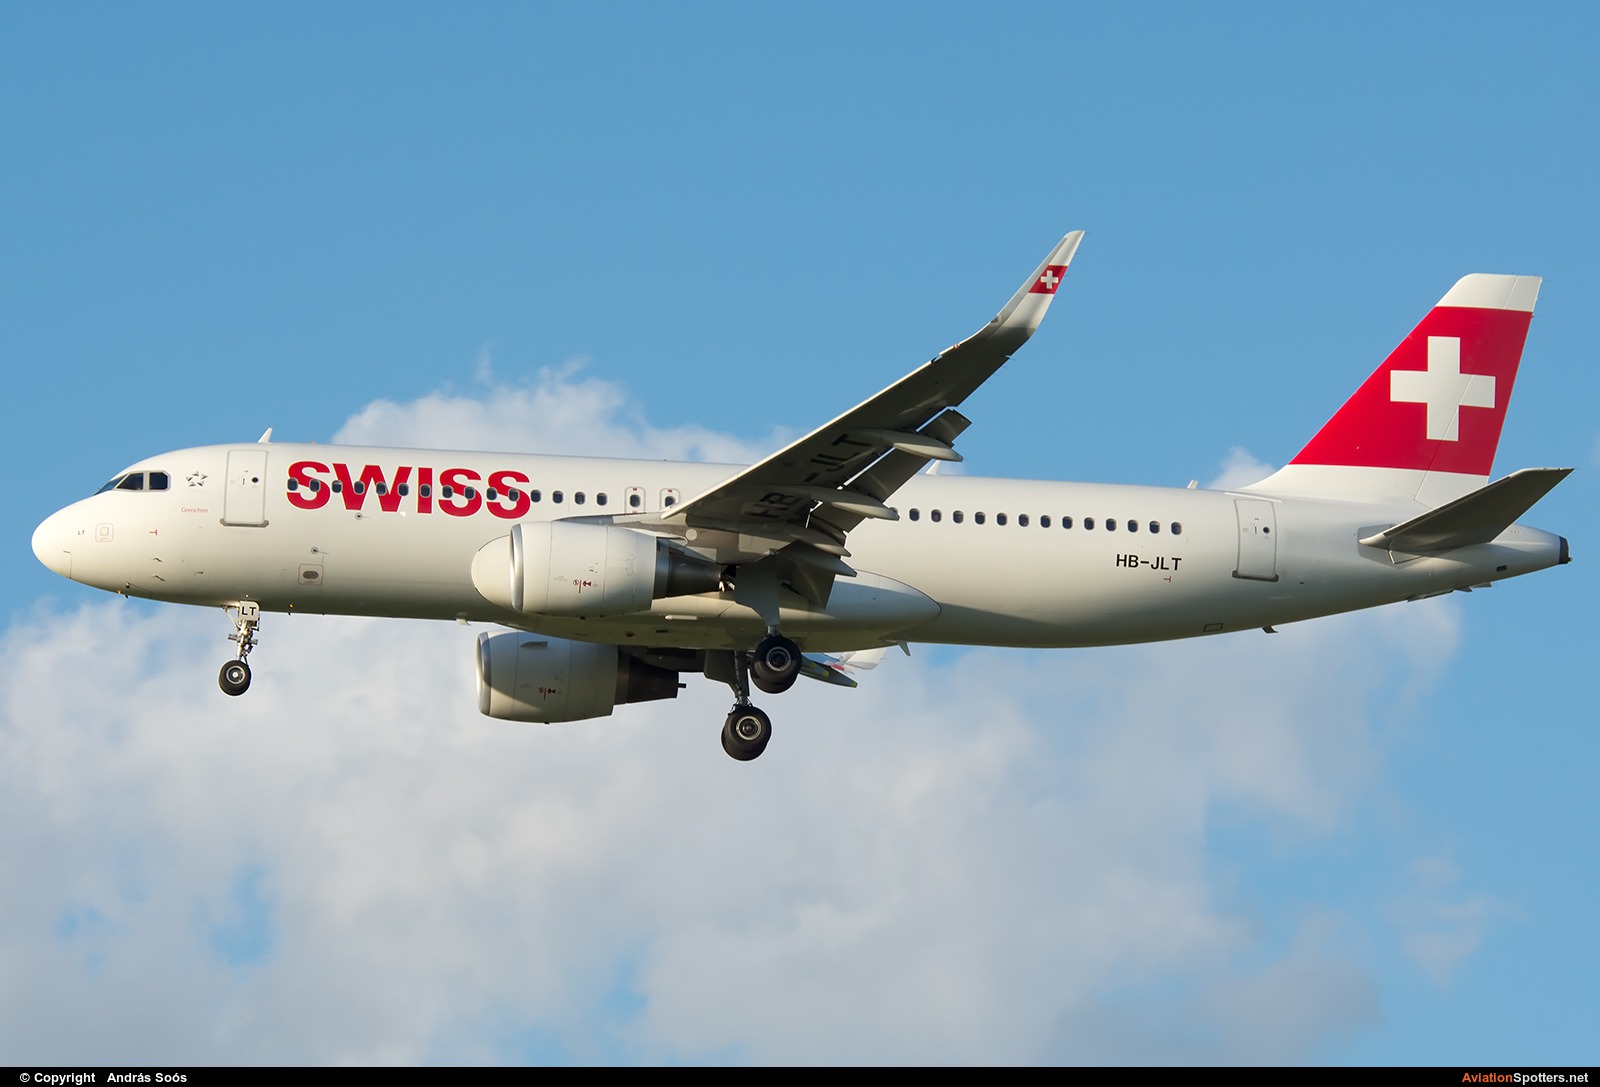 Swiss Airlines  -  A320-214  (HB-JLT) By András Soós (sas1965)